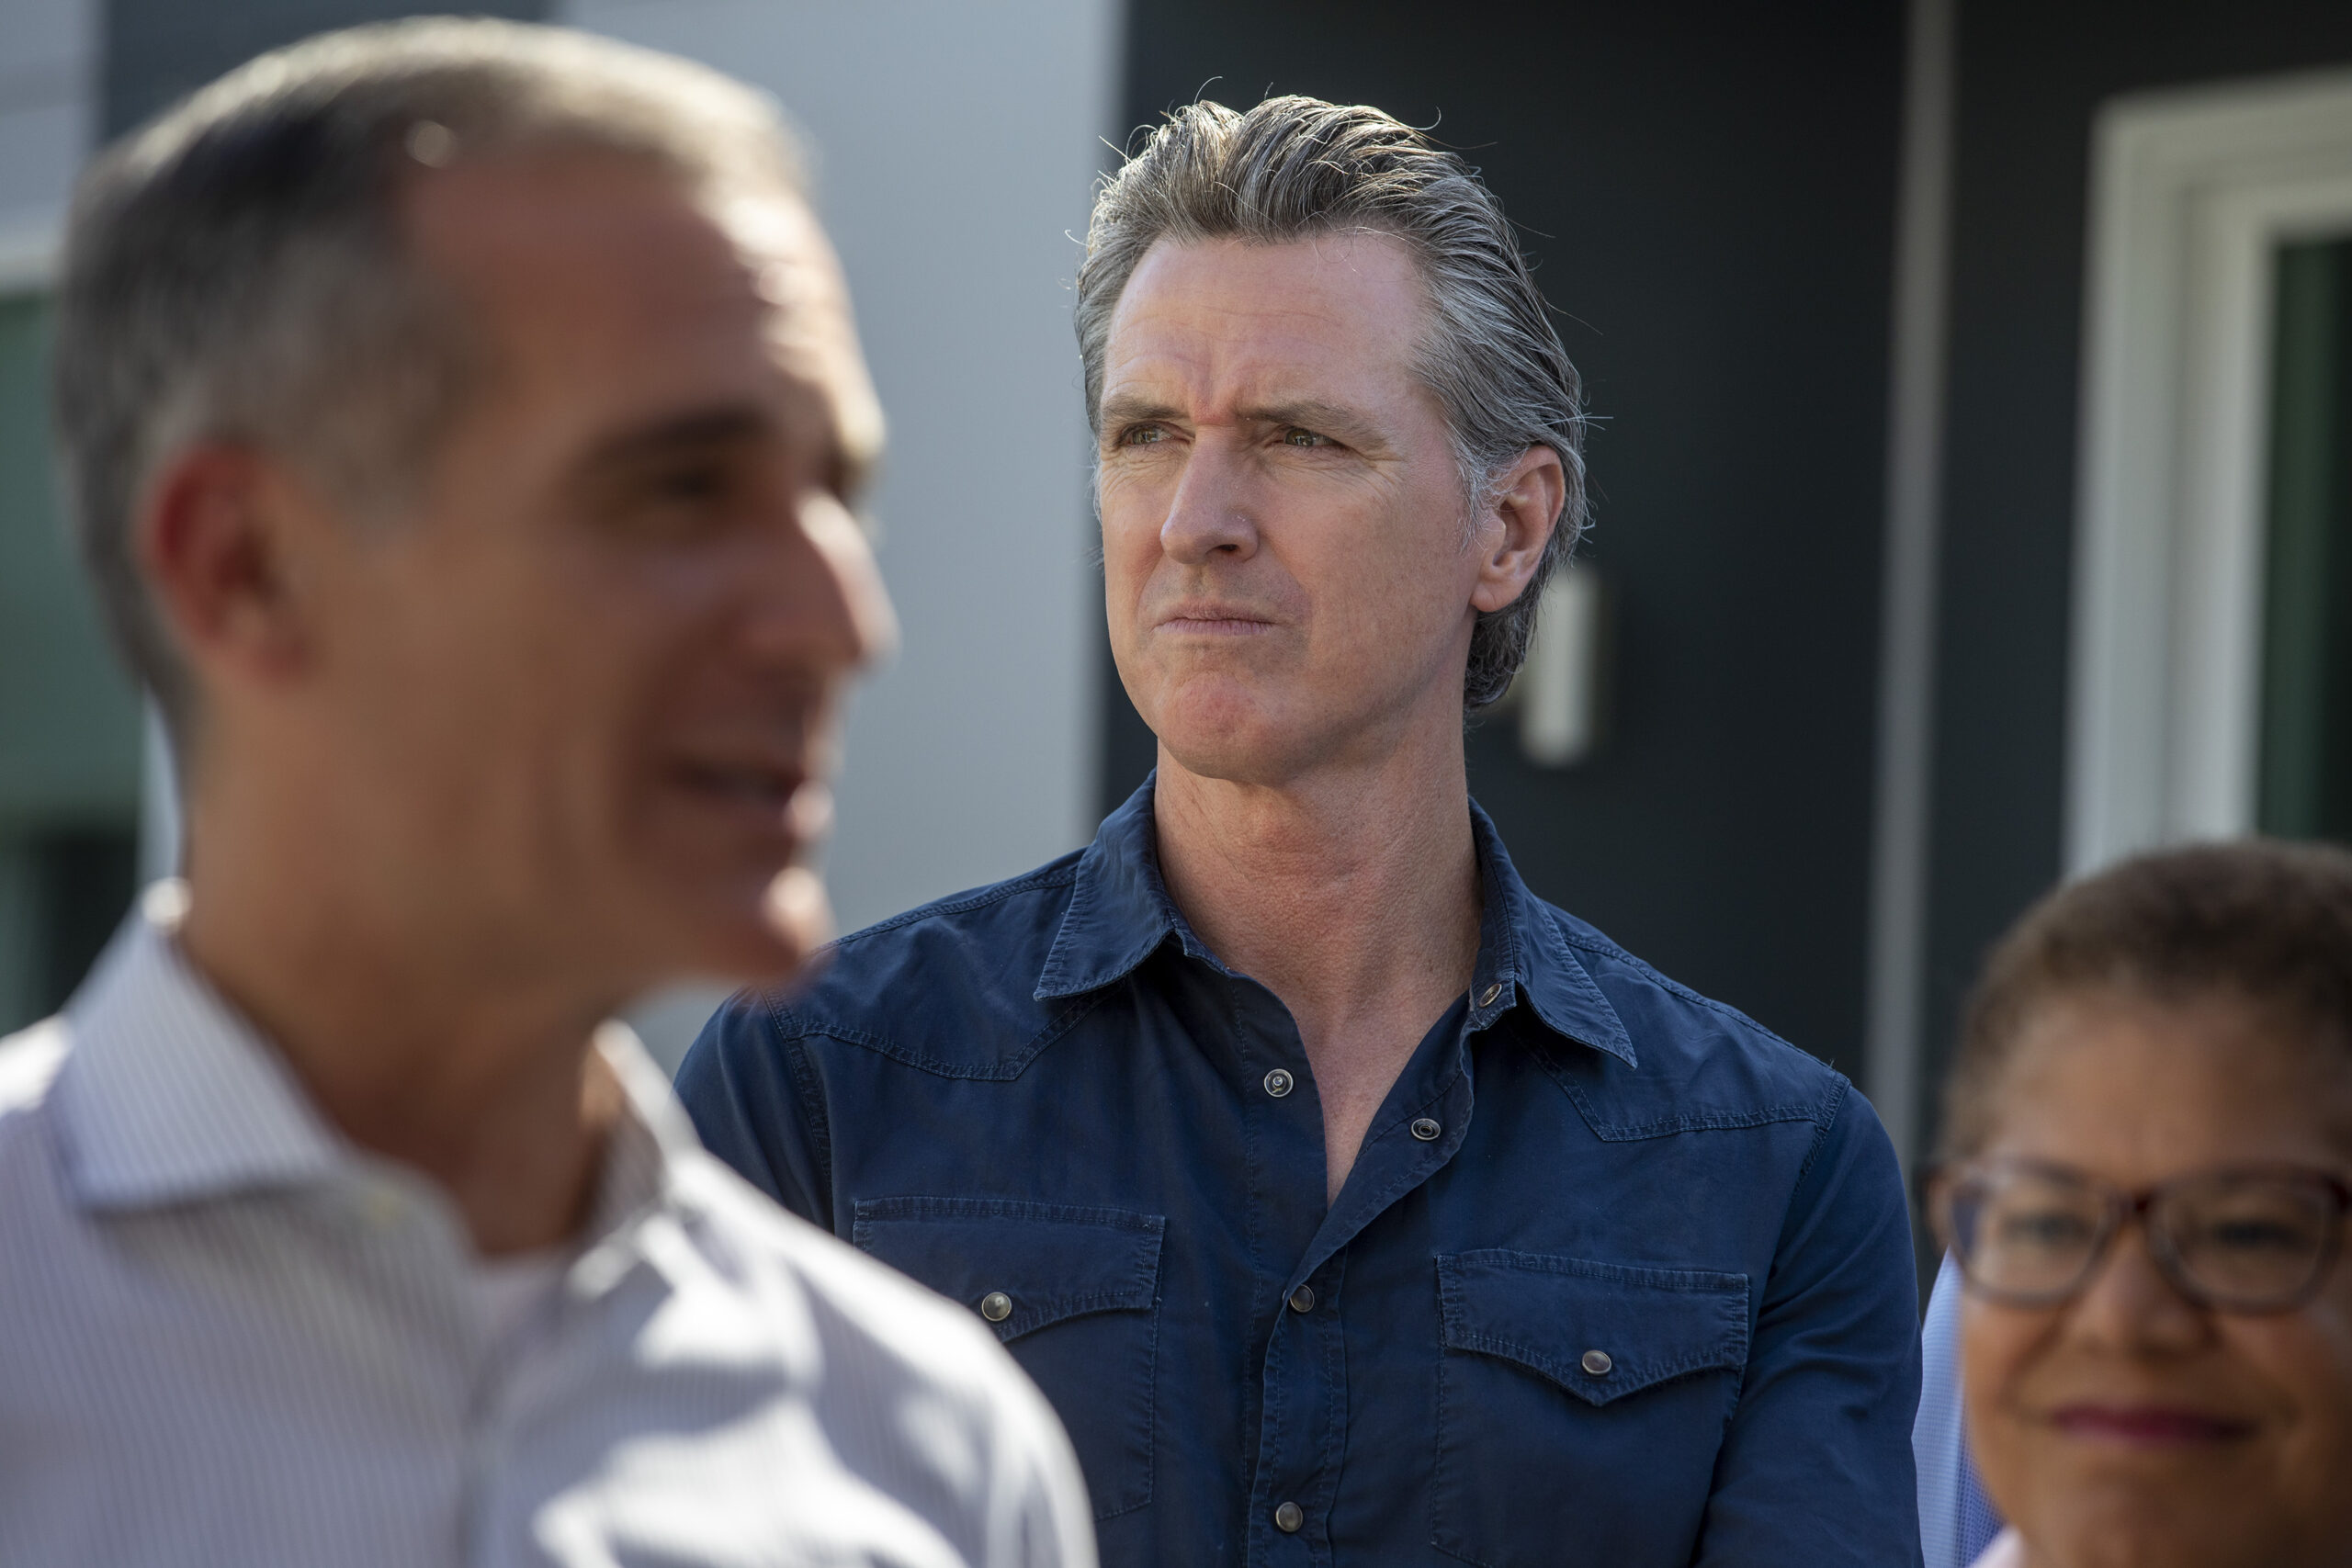 California Voters Are Not Enthused About Gavin Newsom Running for President